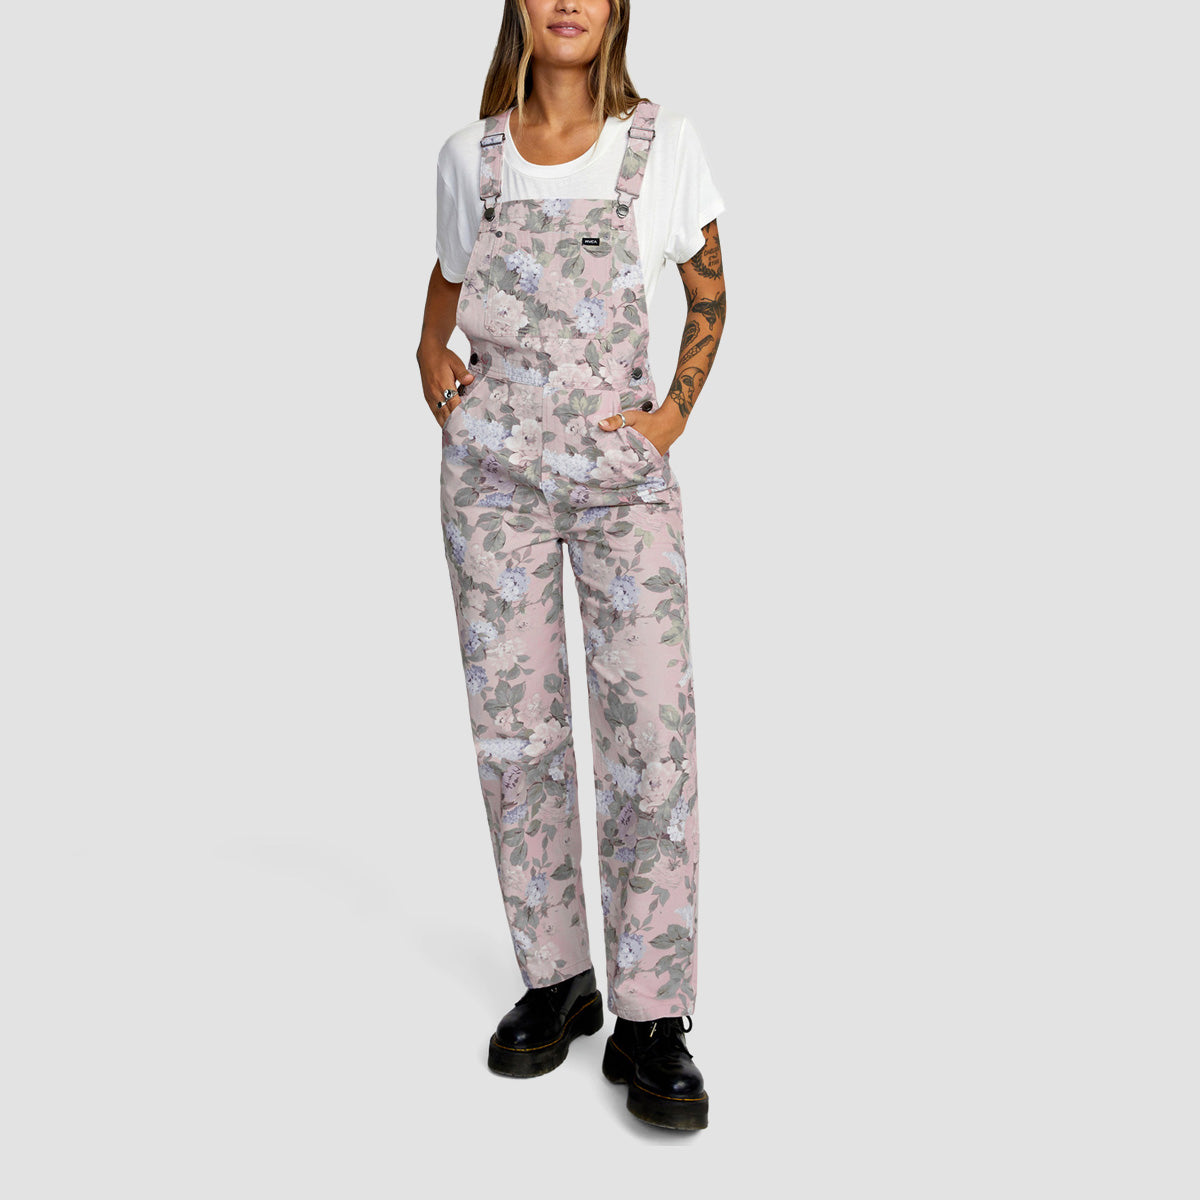 RVCA Succession Overall Dungarees Oatmeal - Womens